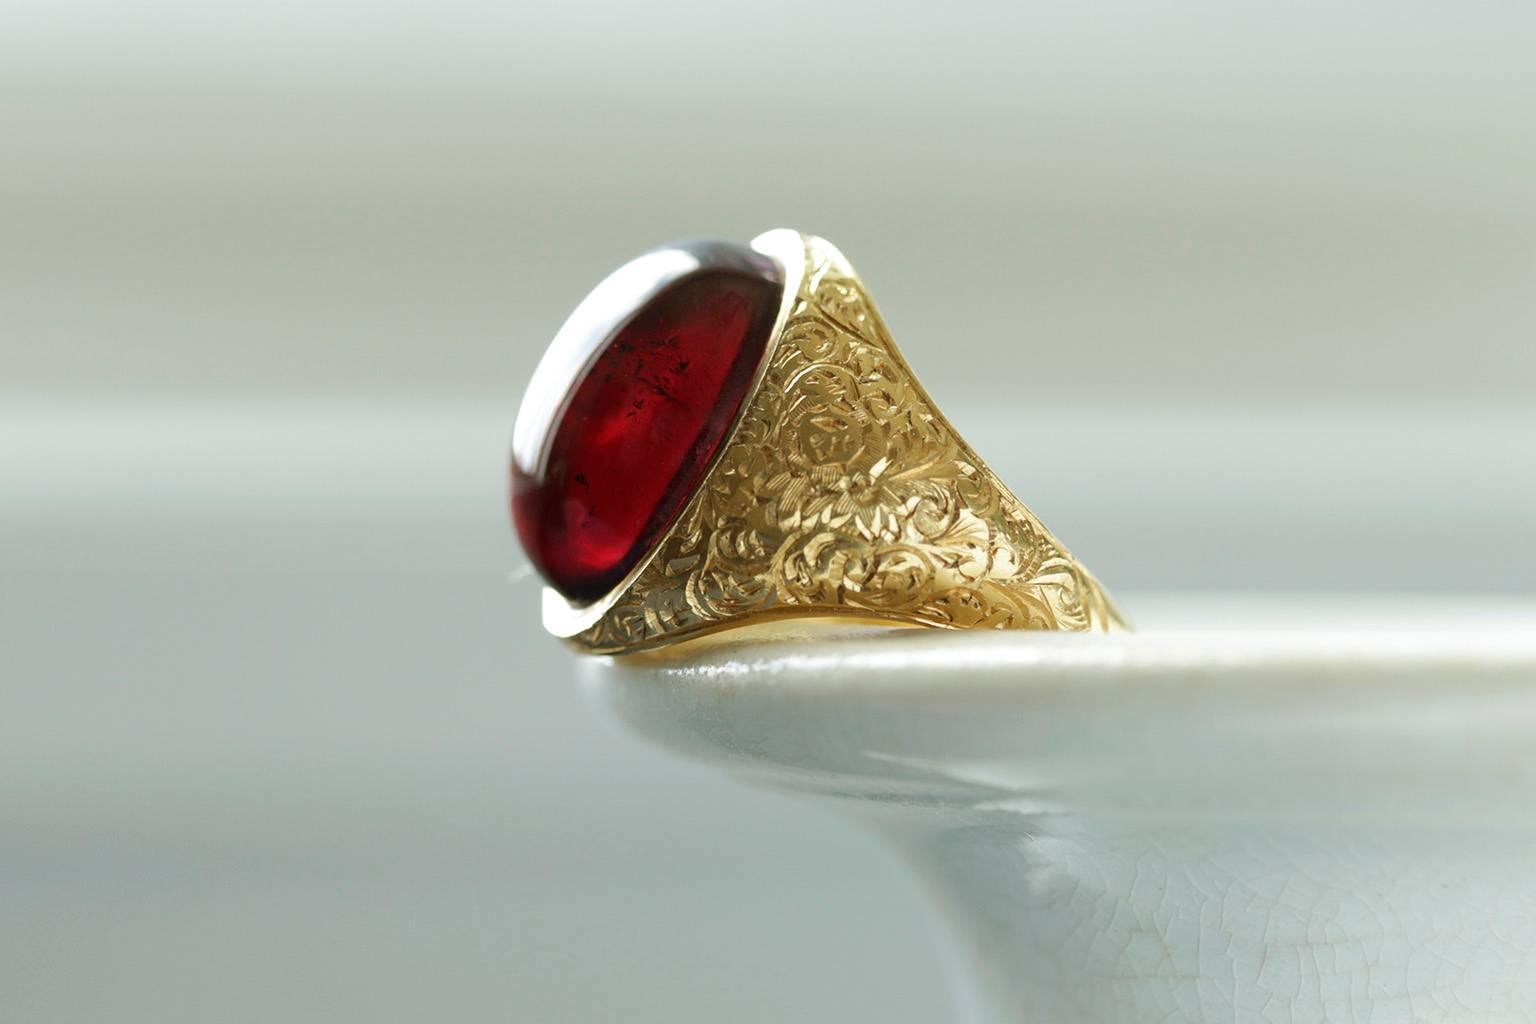 A handsome Victorian garnet cabochon gold ring. It is English hallmarked c.1852. The ring shows beautiful chasing on shoulders. With light, the garnet cabochon glows with a deep red wine hue. The sizable garnet offers a strong presence. Overall in